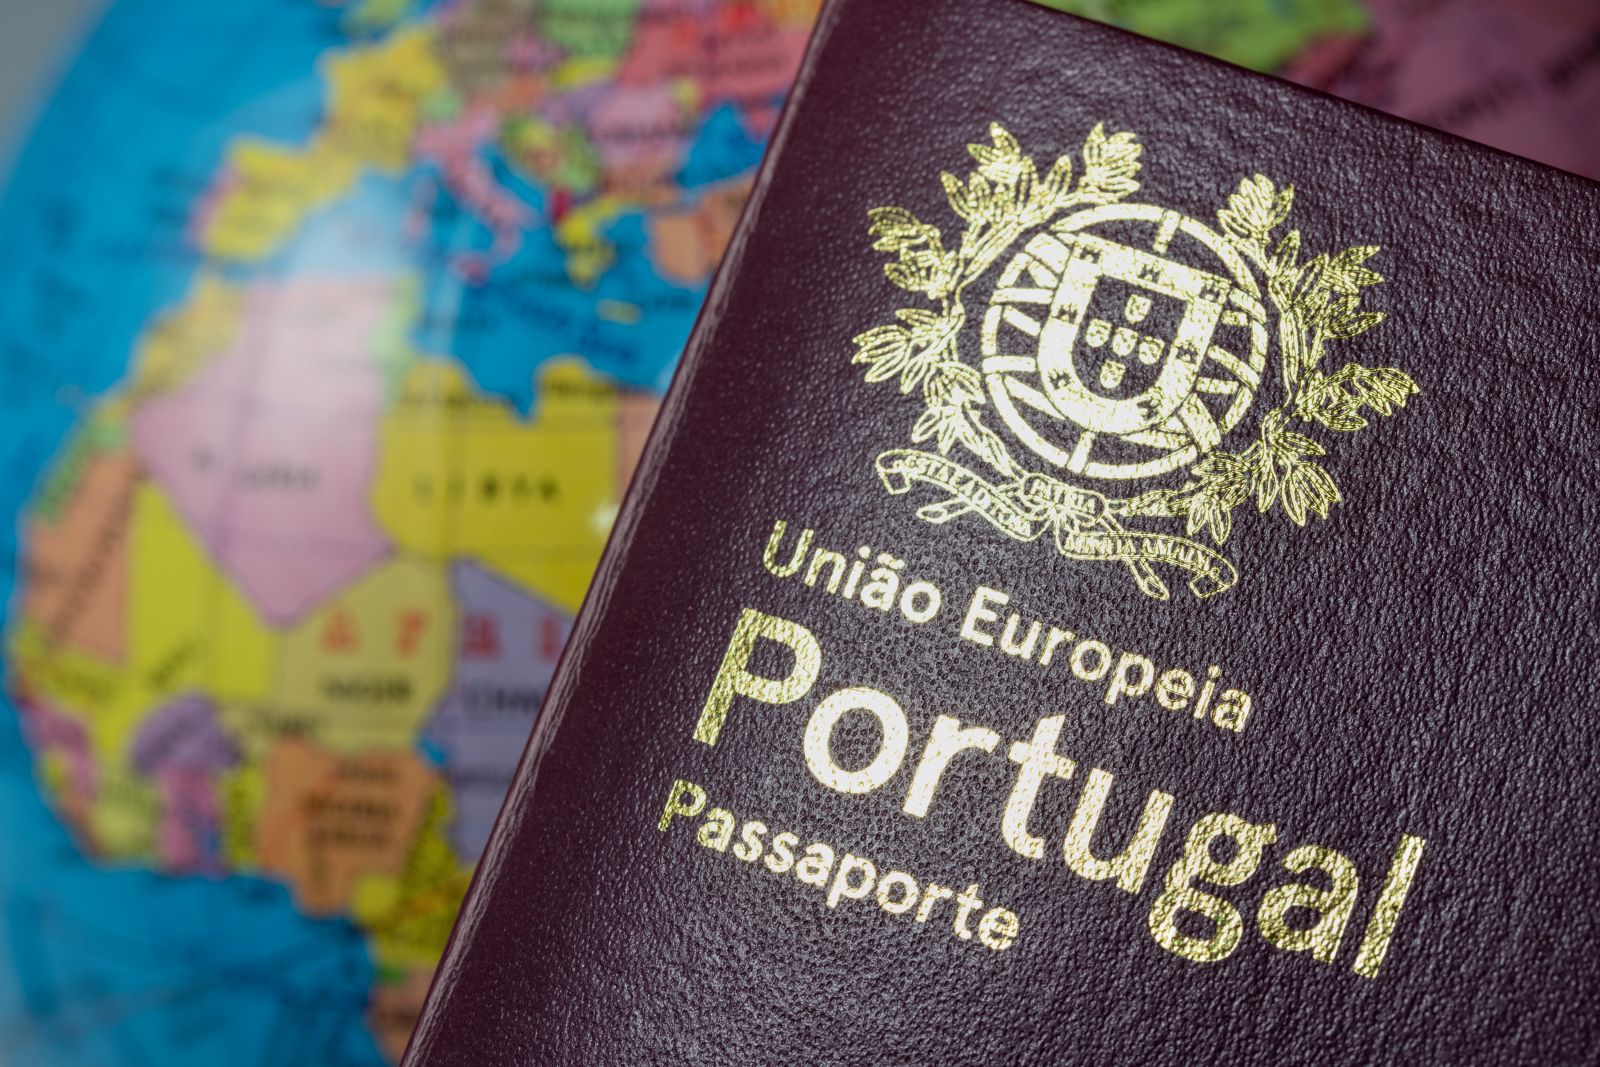 Portugal has one of the strongest passports and accepts dual (or multiple) citizenships.